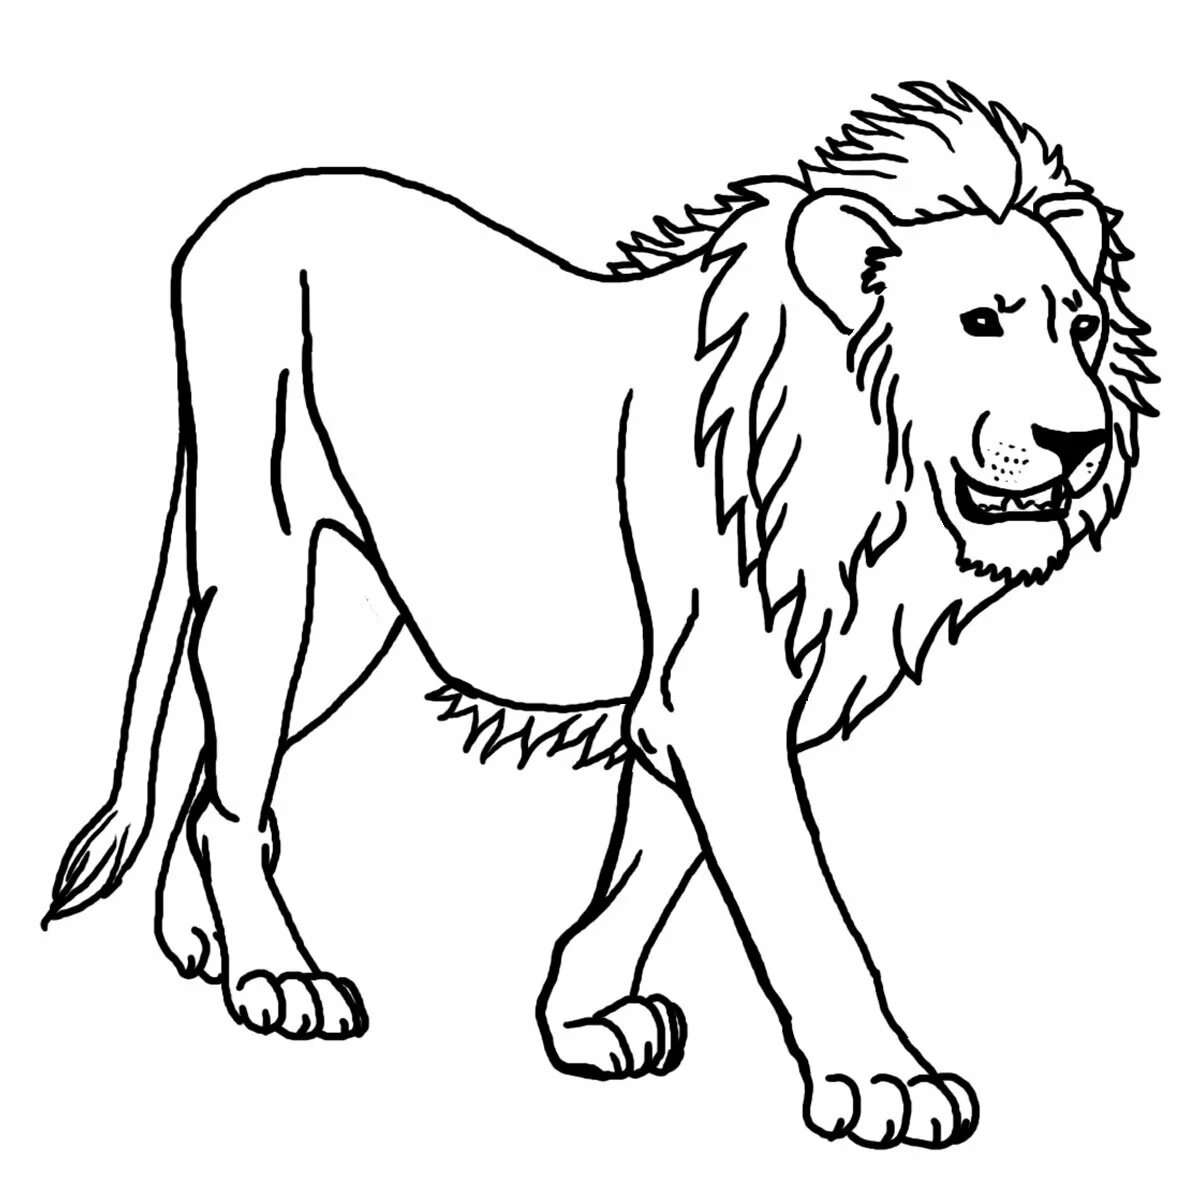 Color-frenzy andar coloring page